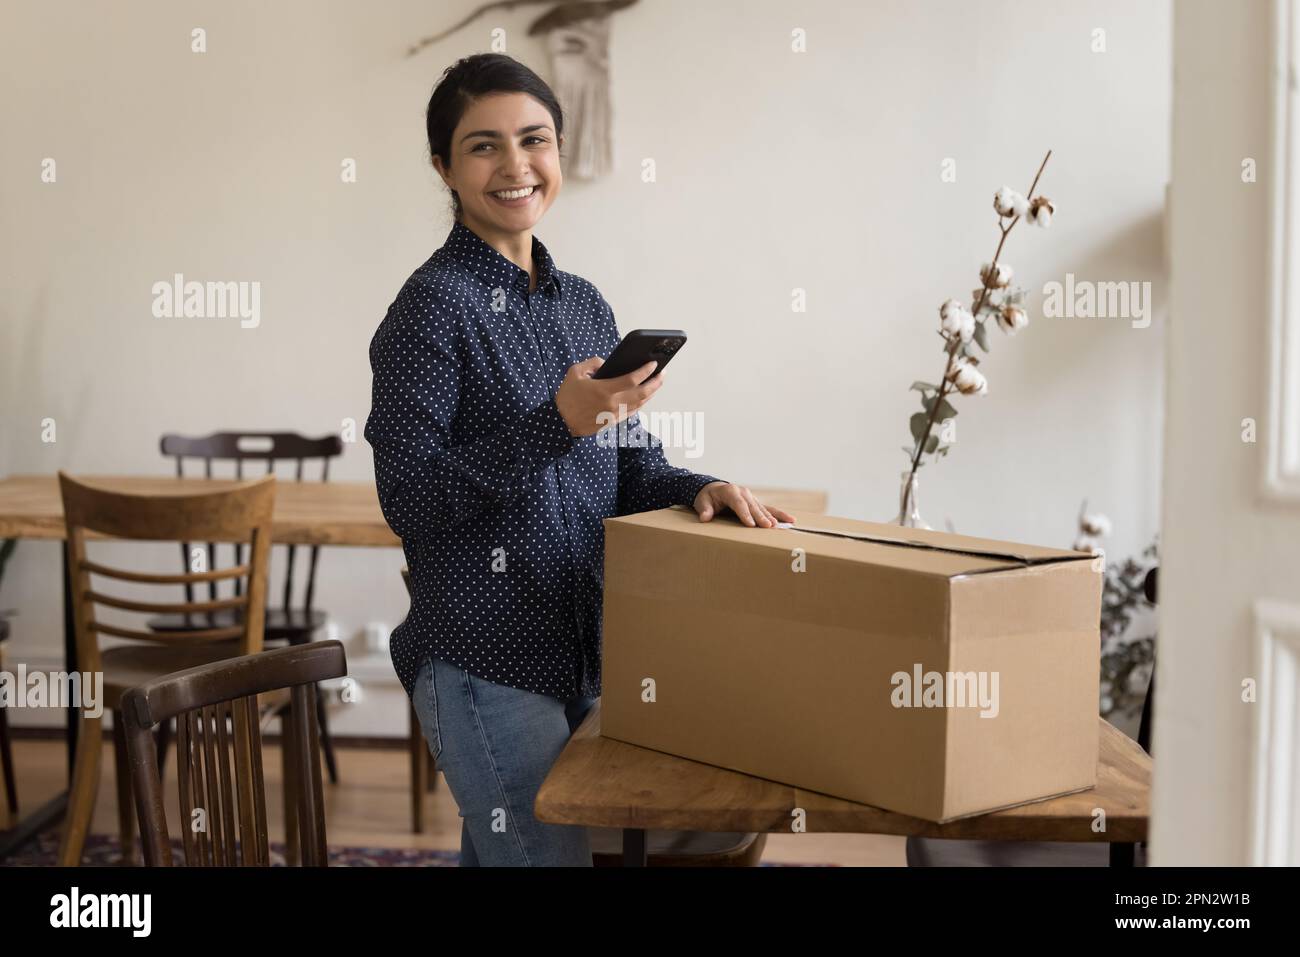 Satisfied Indian woman sending parcel using courier on-line services Stock Photo